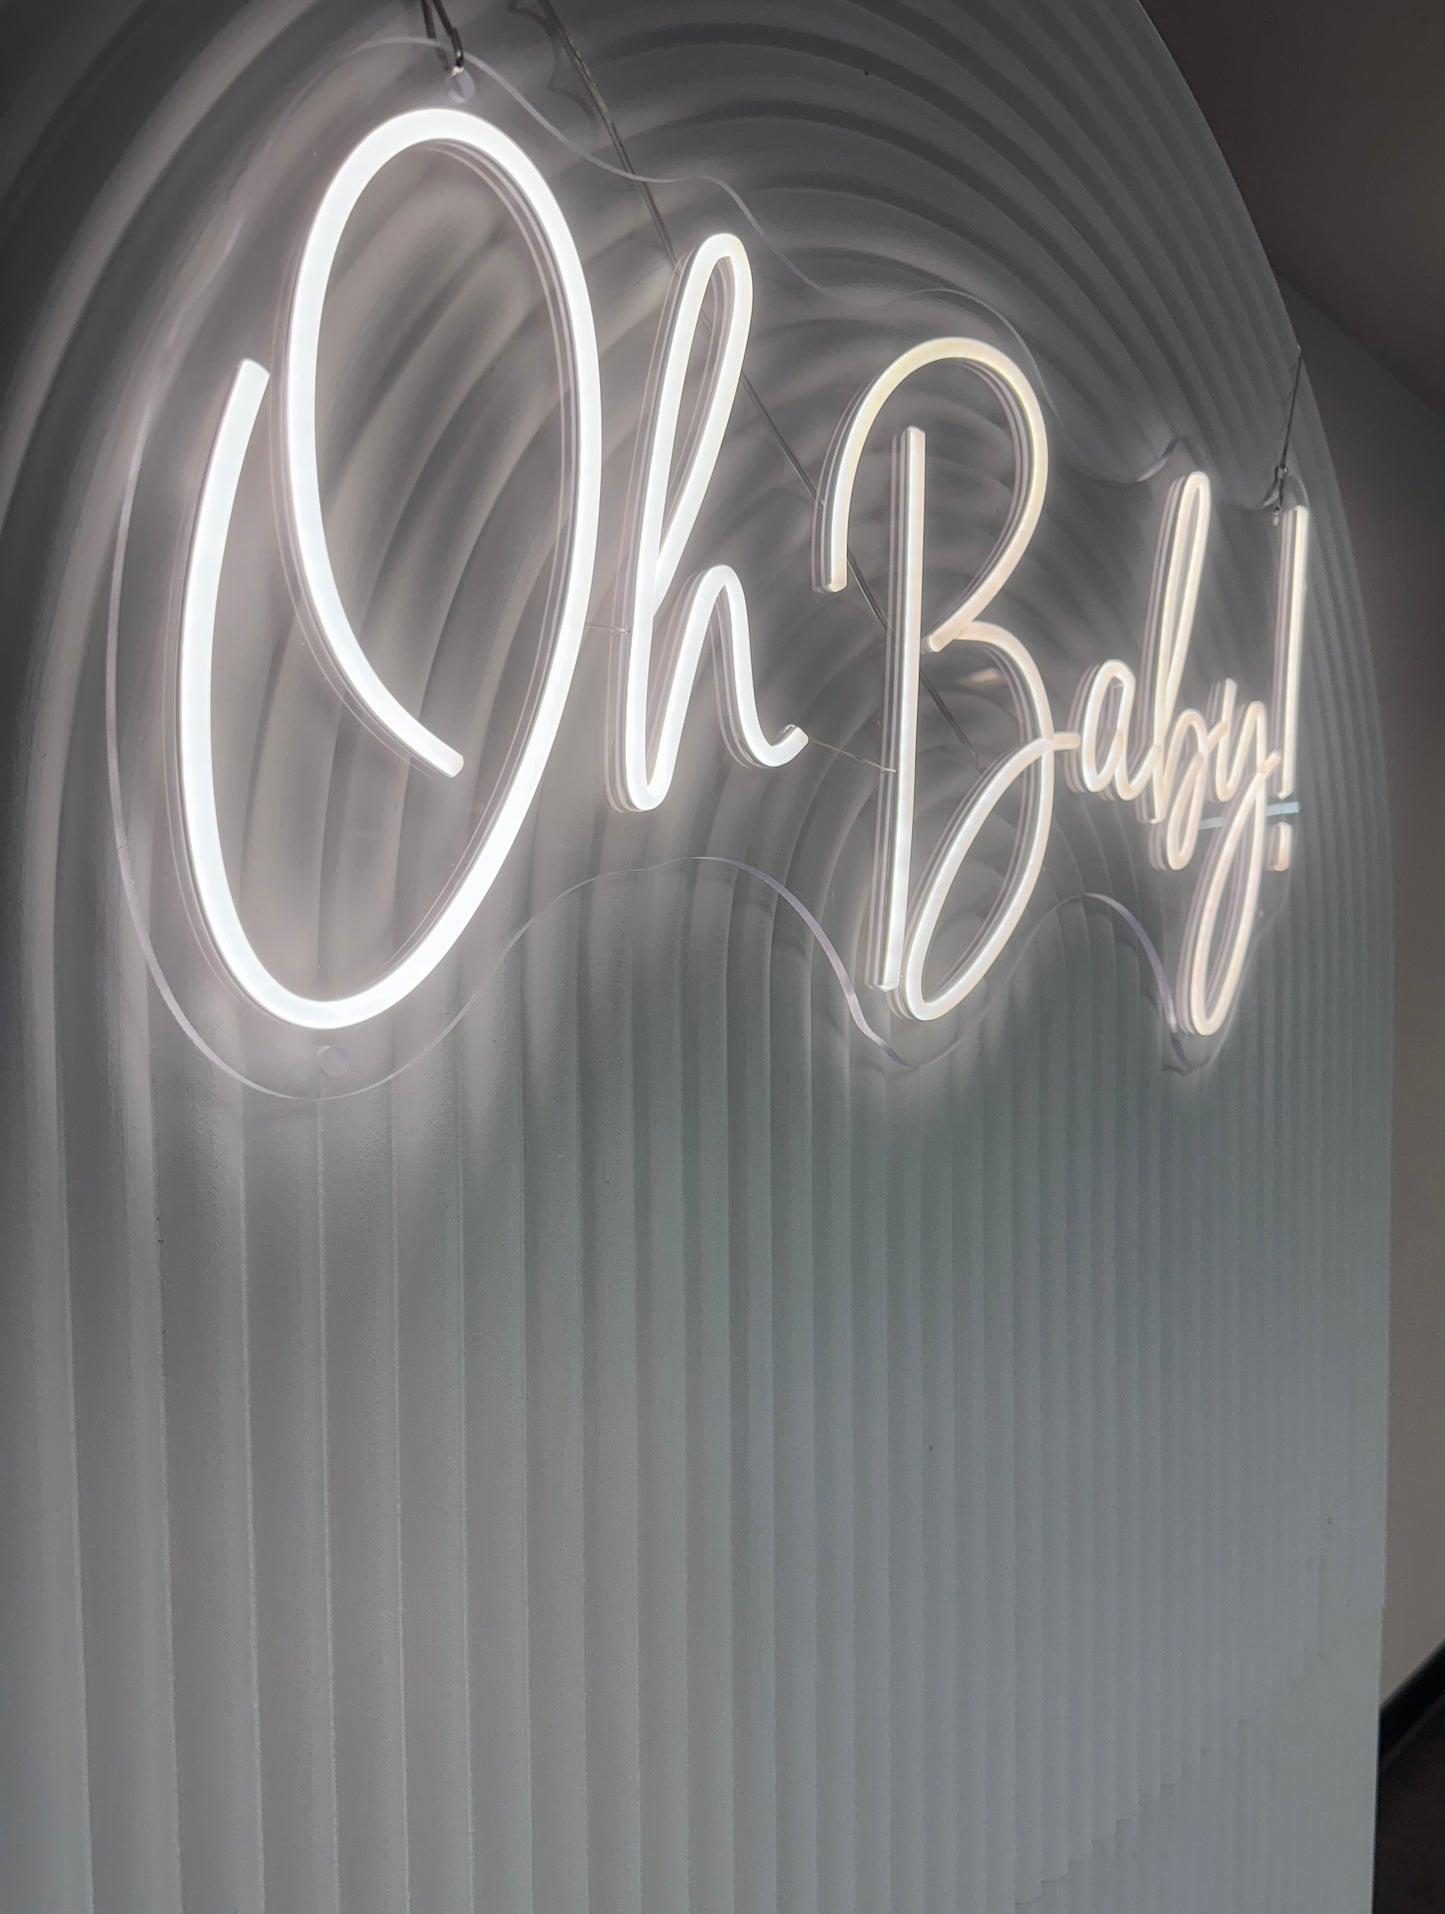 Large "Oh Baby!" Neon Sign RENTAL